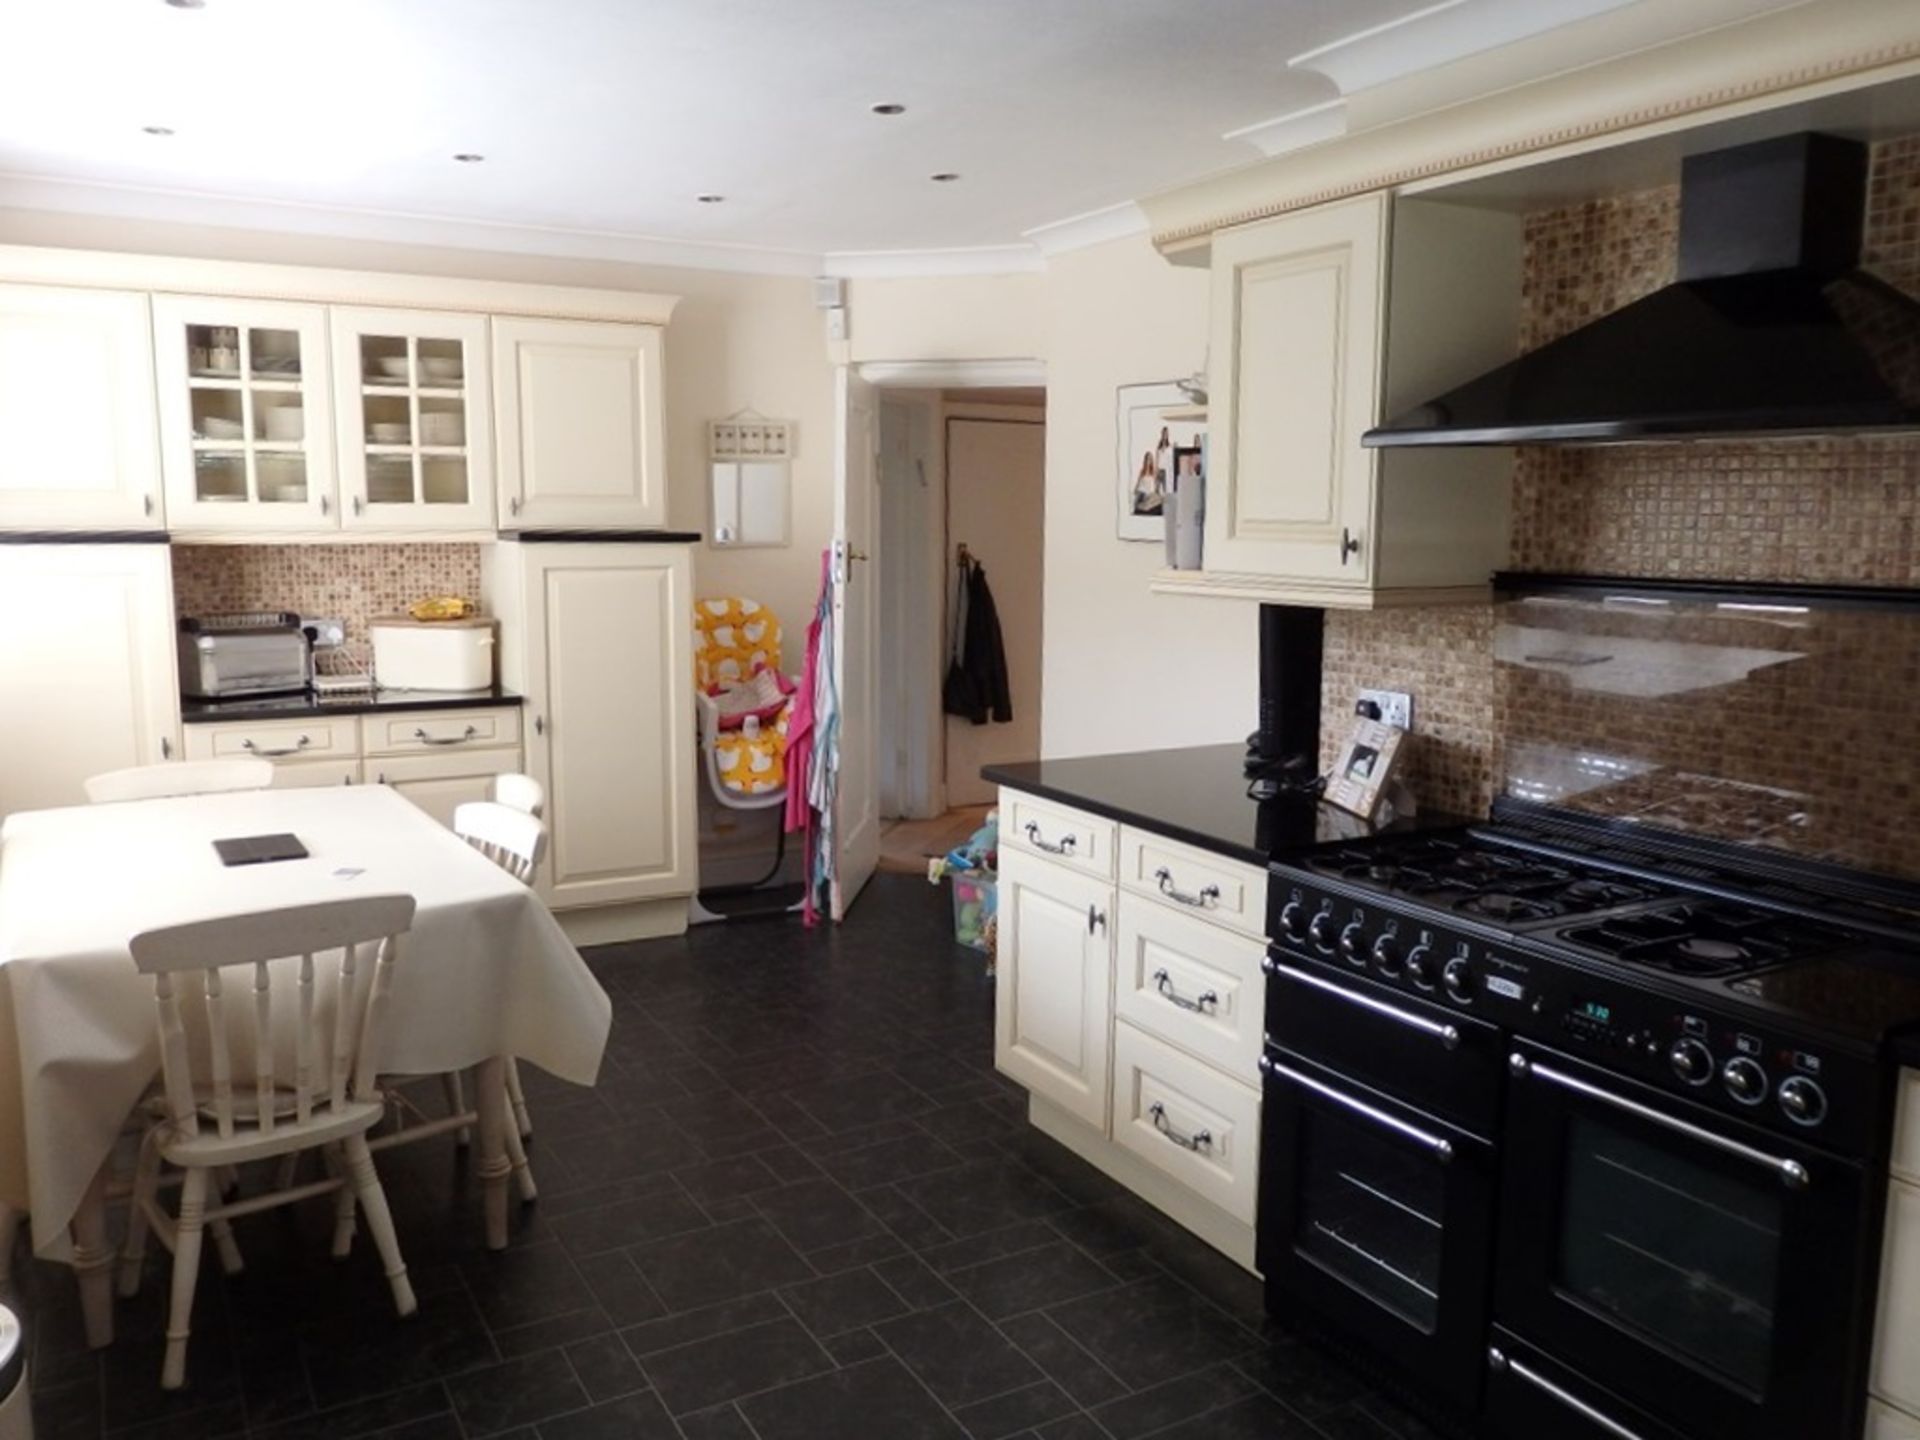 1 x Traditional Style Cream Kitchen With Luxurious Black Granite Worktops - Includes Freezer & - Image 27 of 31